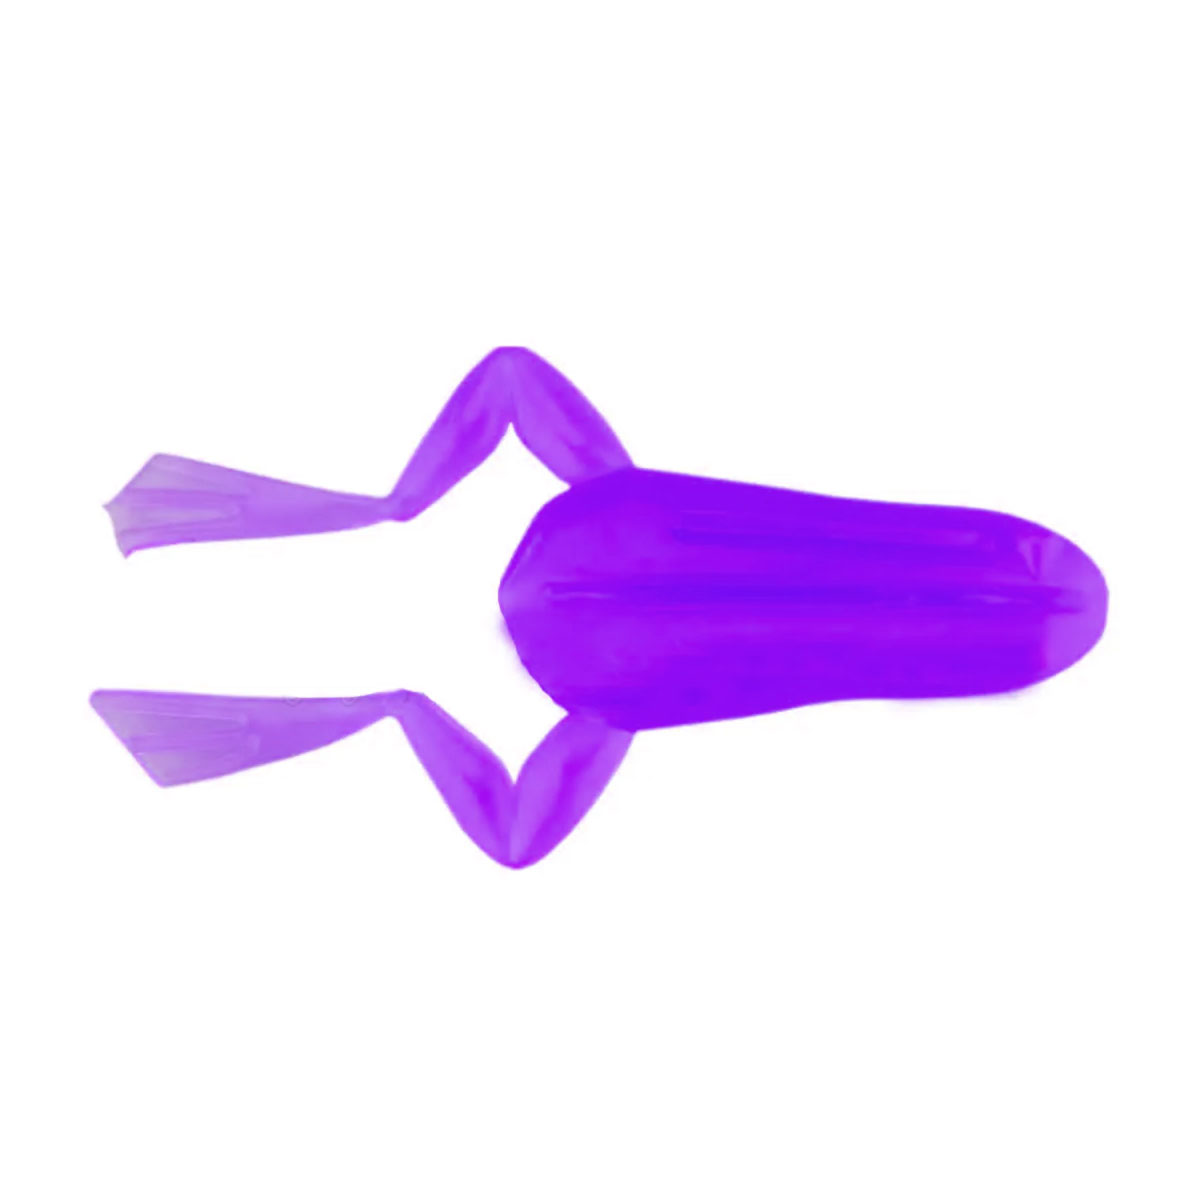 Isca M3x Tail Frog 2un Isca  Purple - 9x